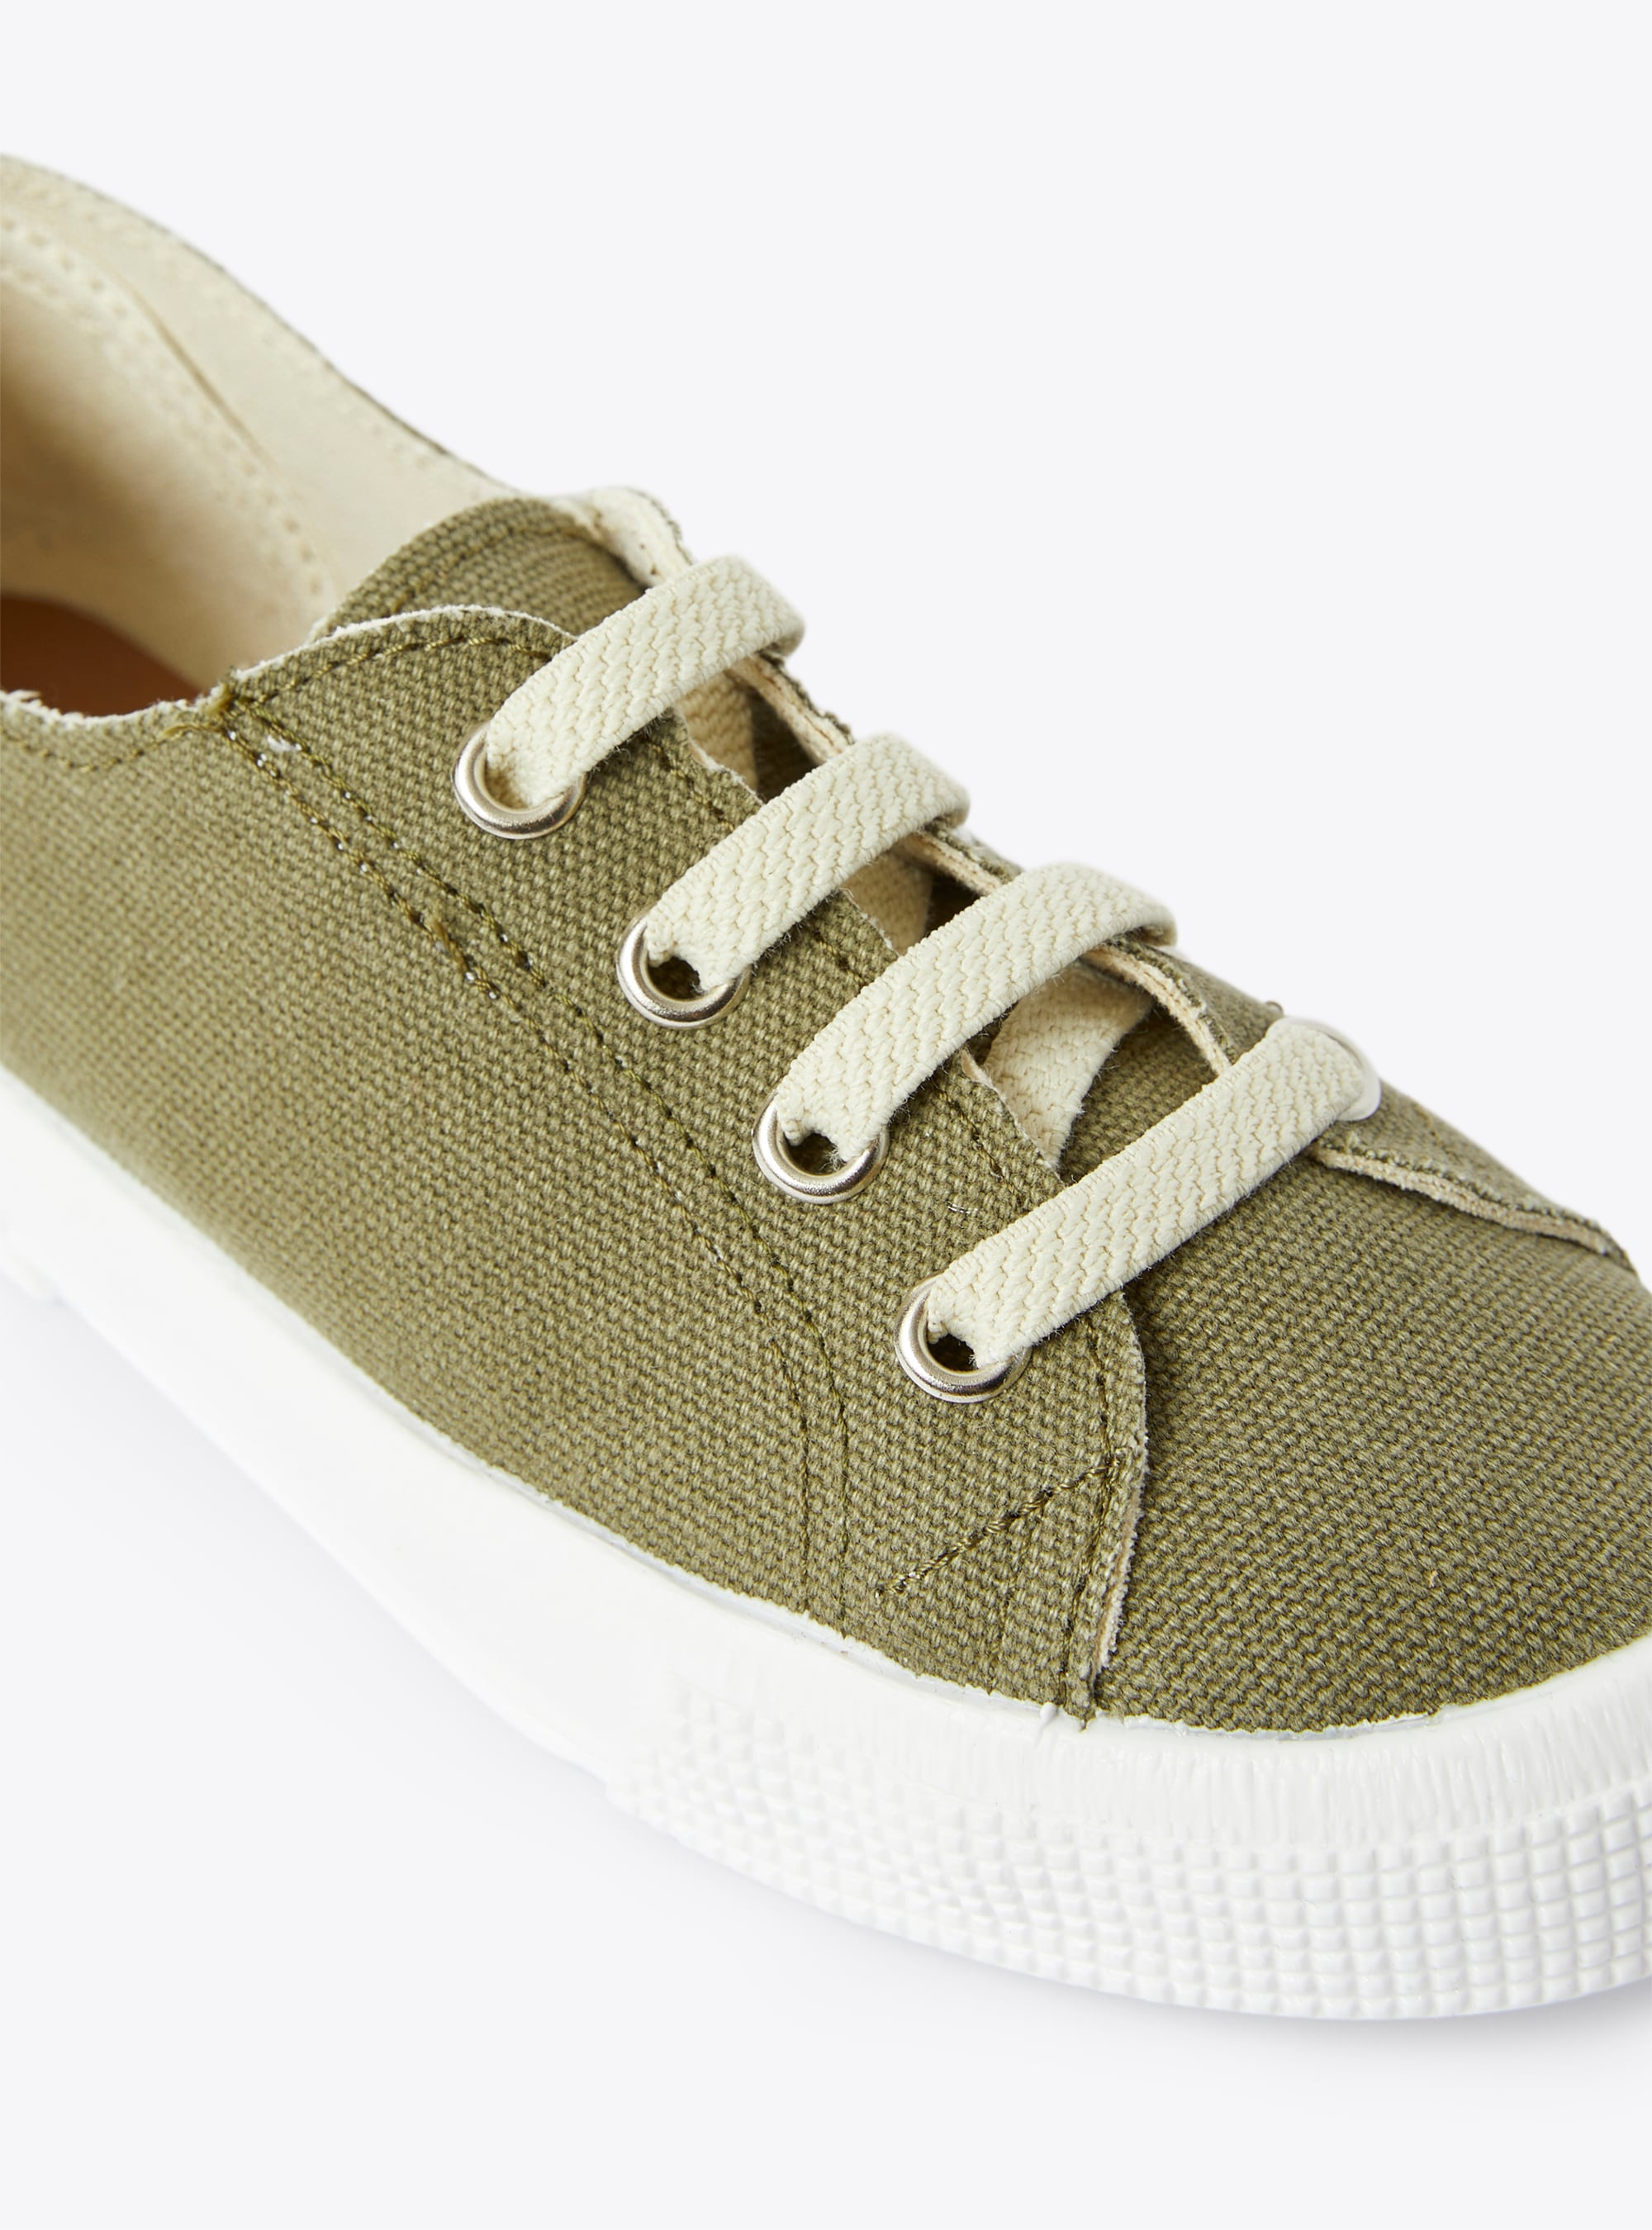 Sneakers in sage-green canvas - Green | Il Gufo